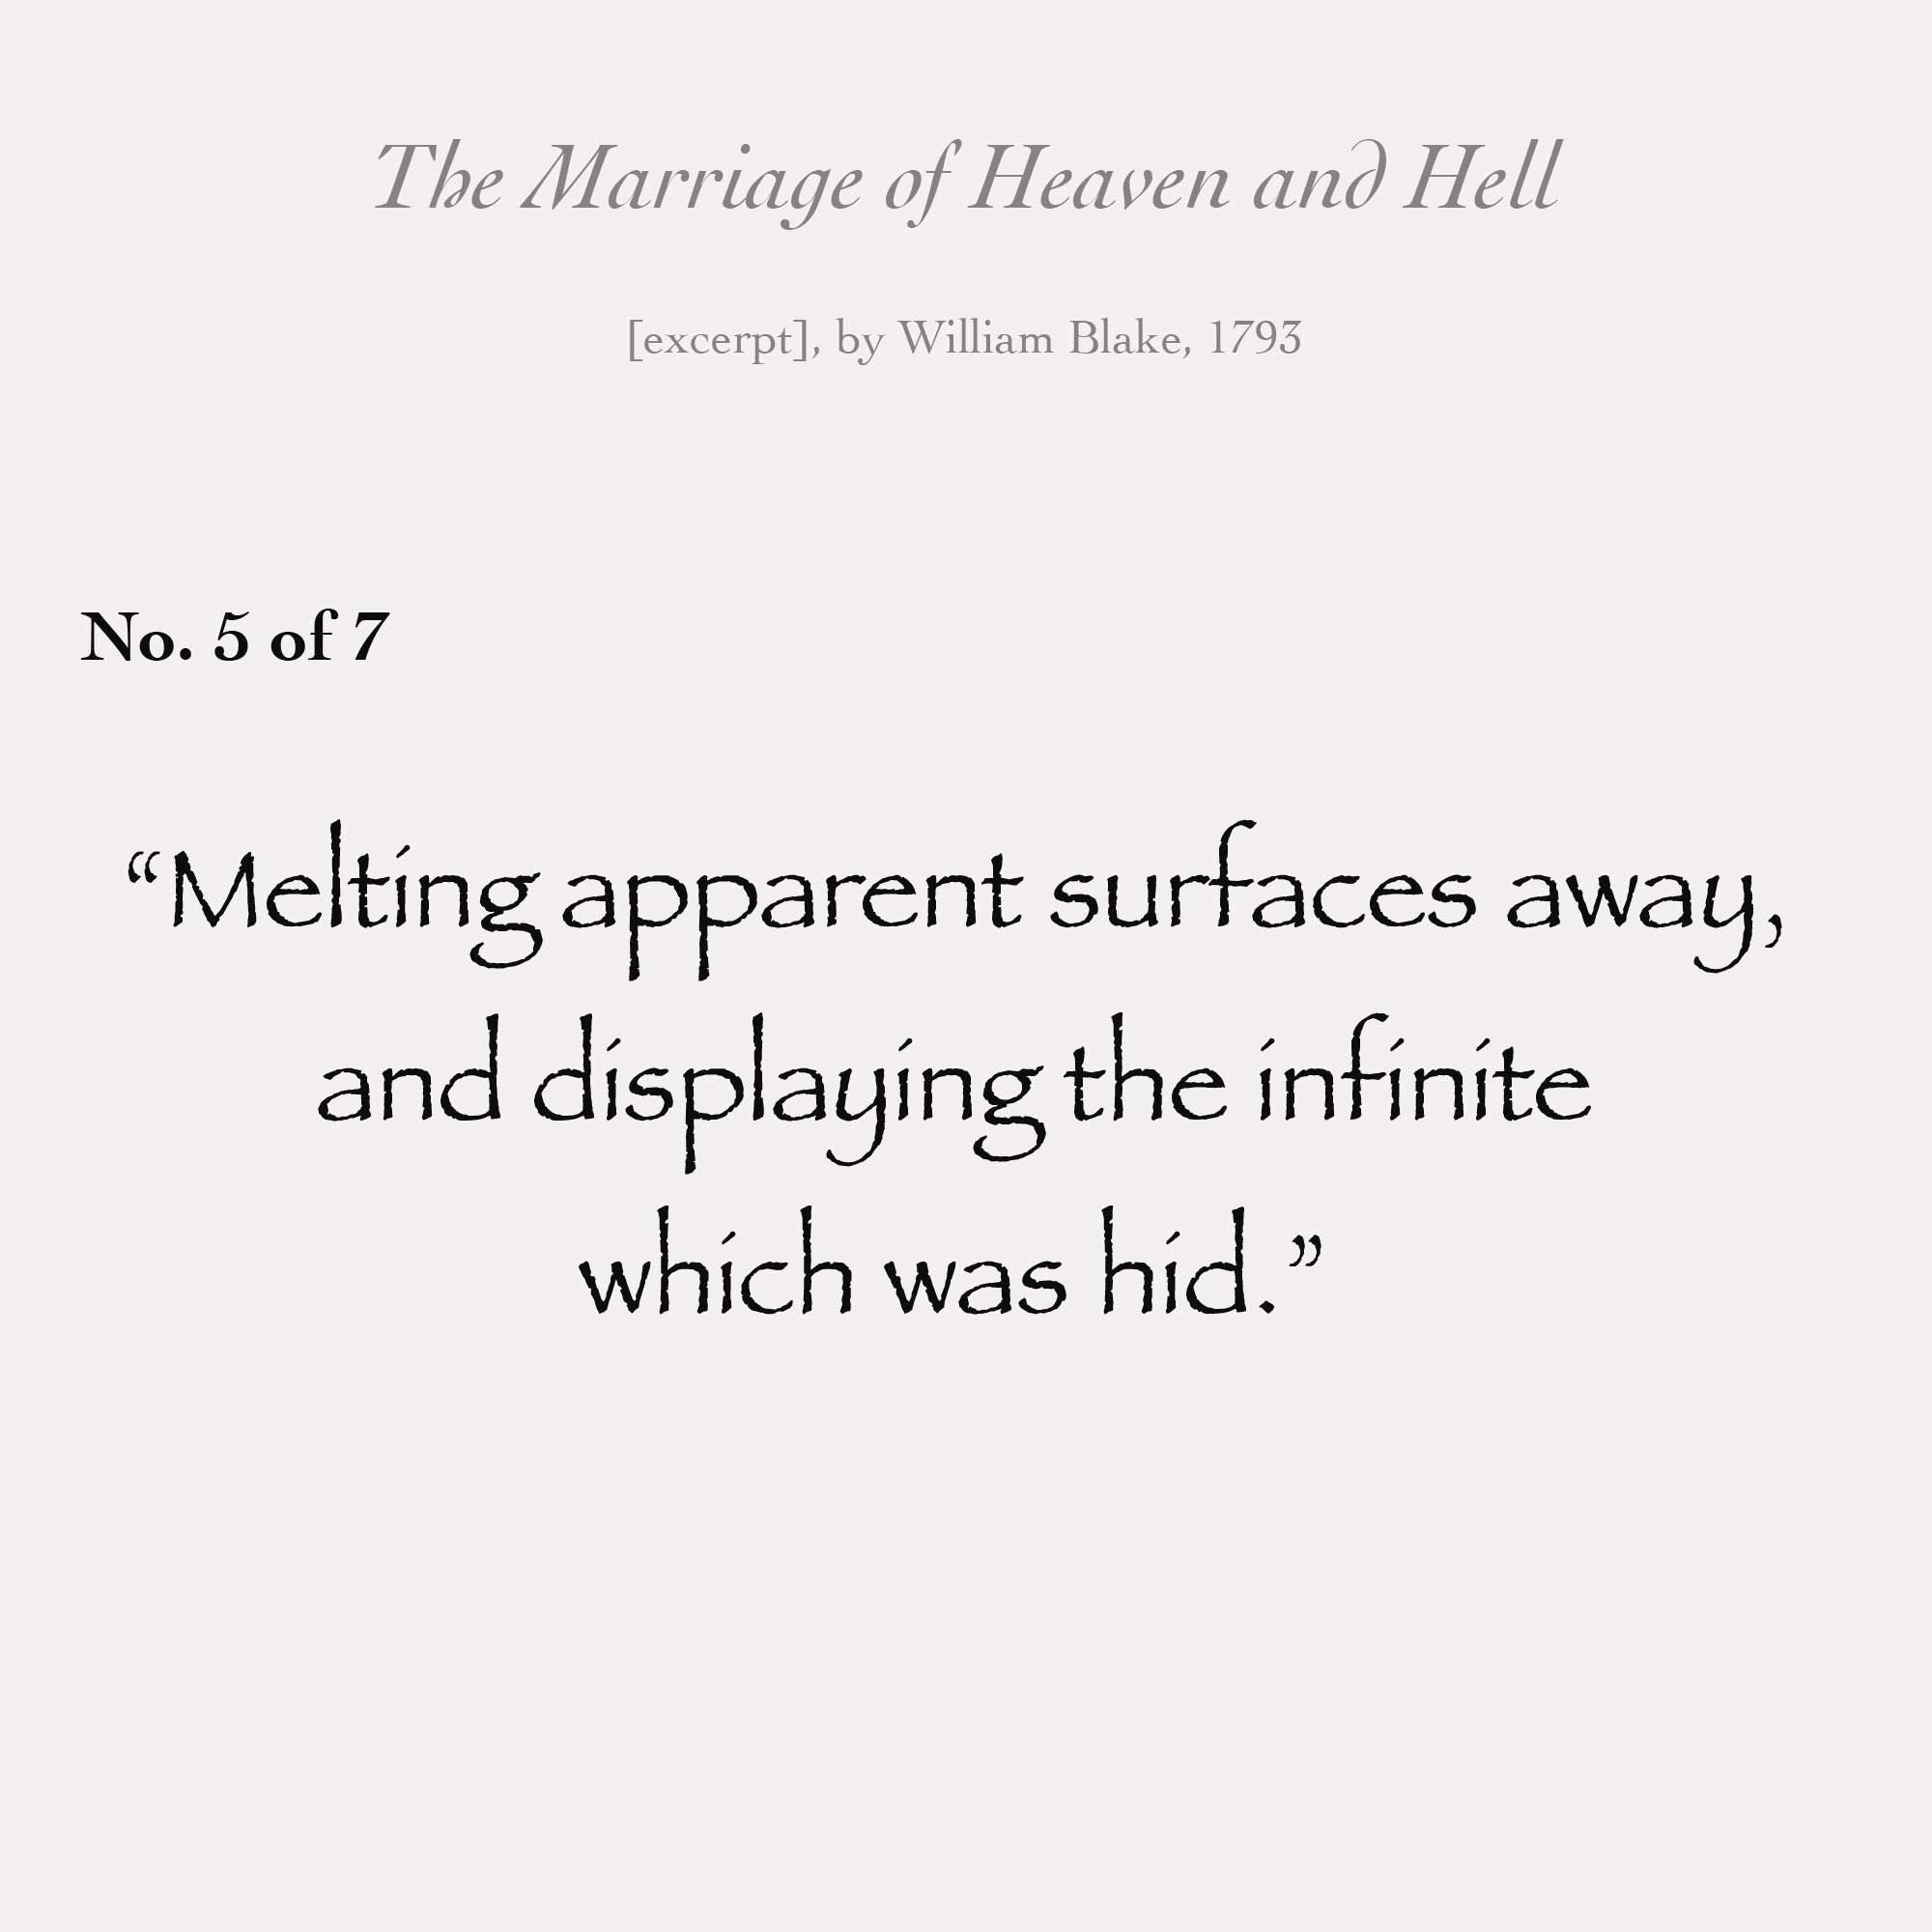 "Melting apparent surfaces away, and displaying the infinite which was hid."